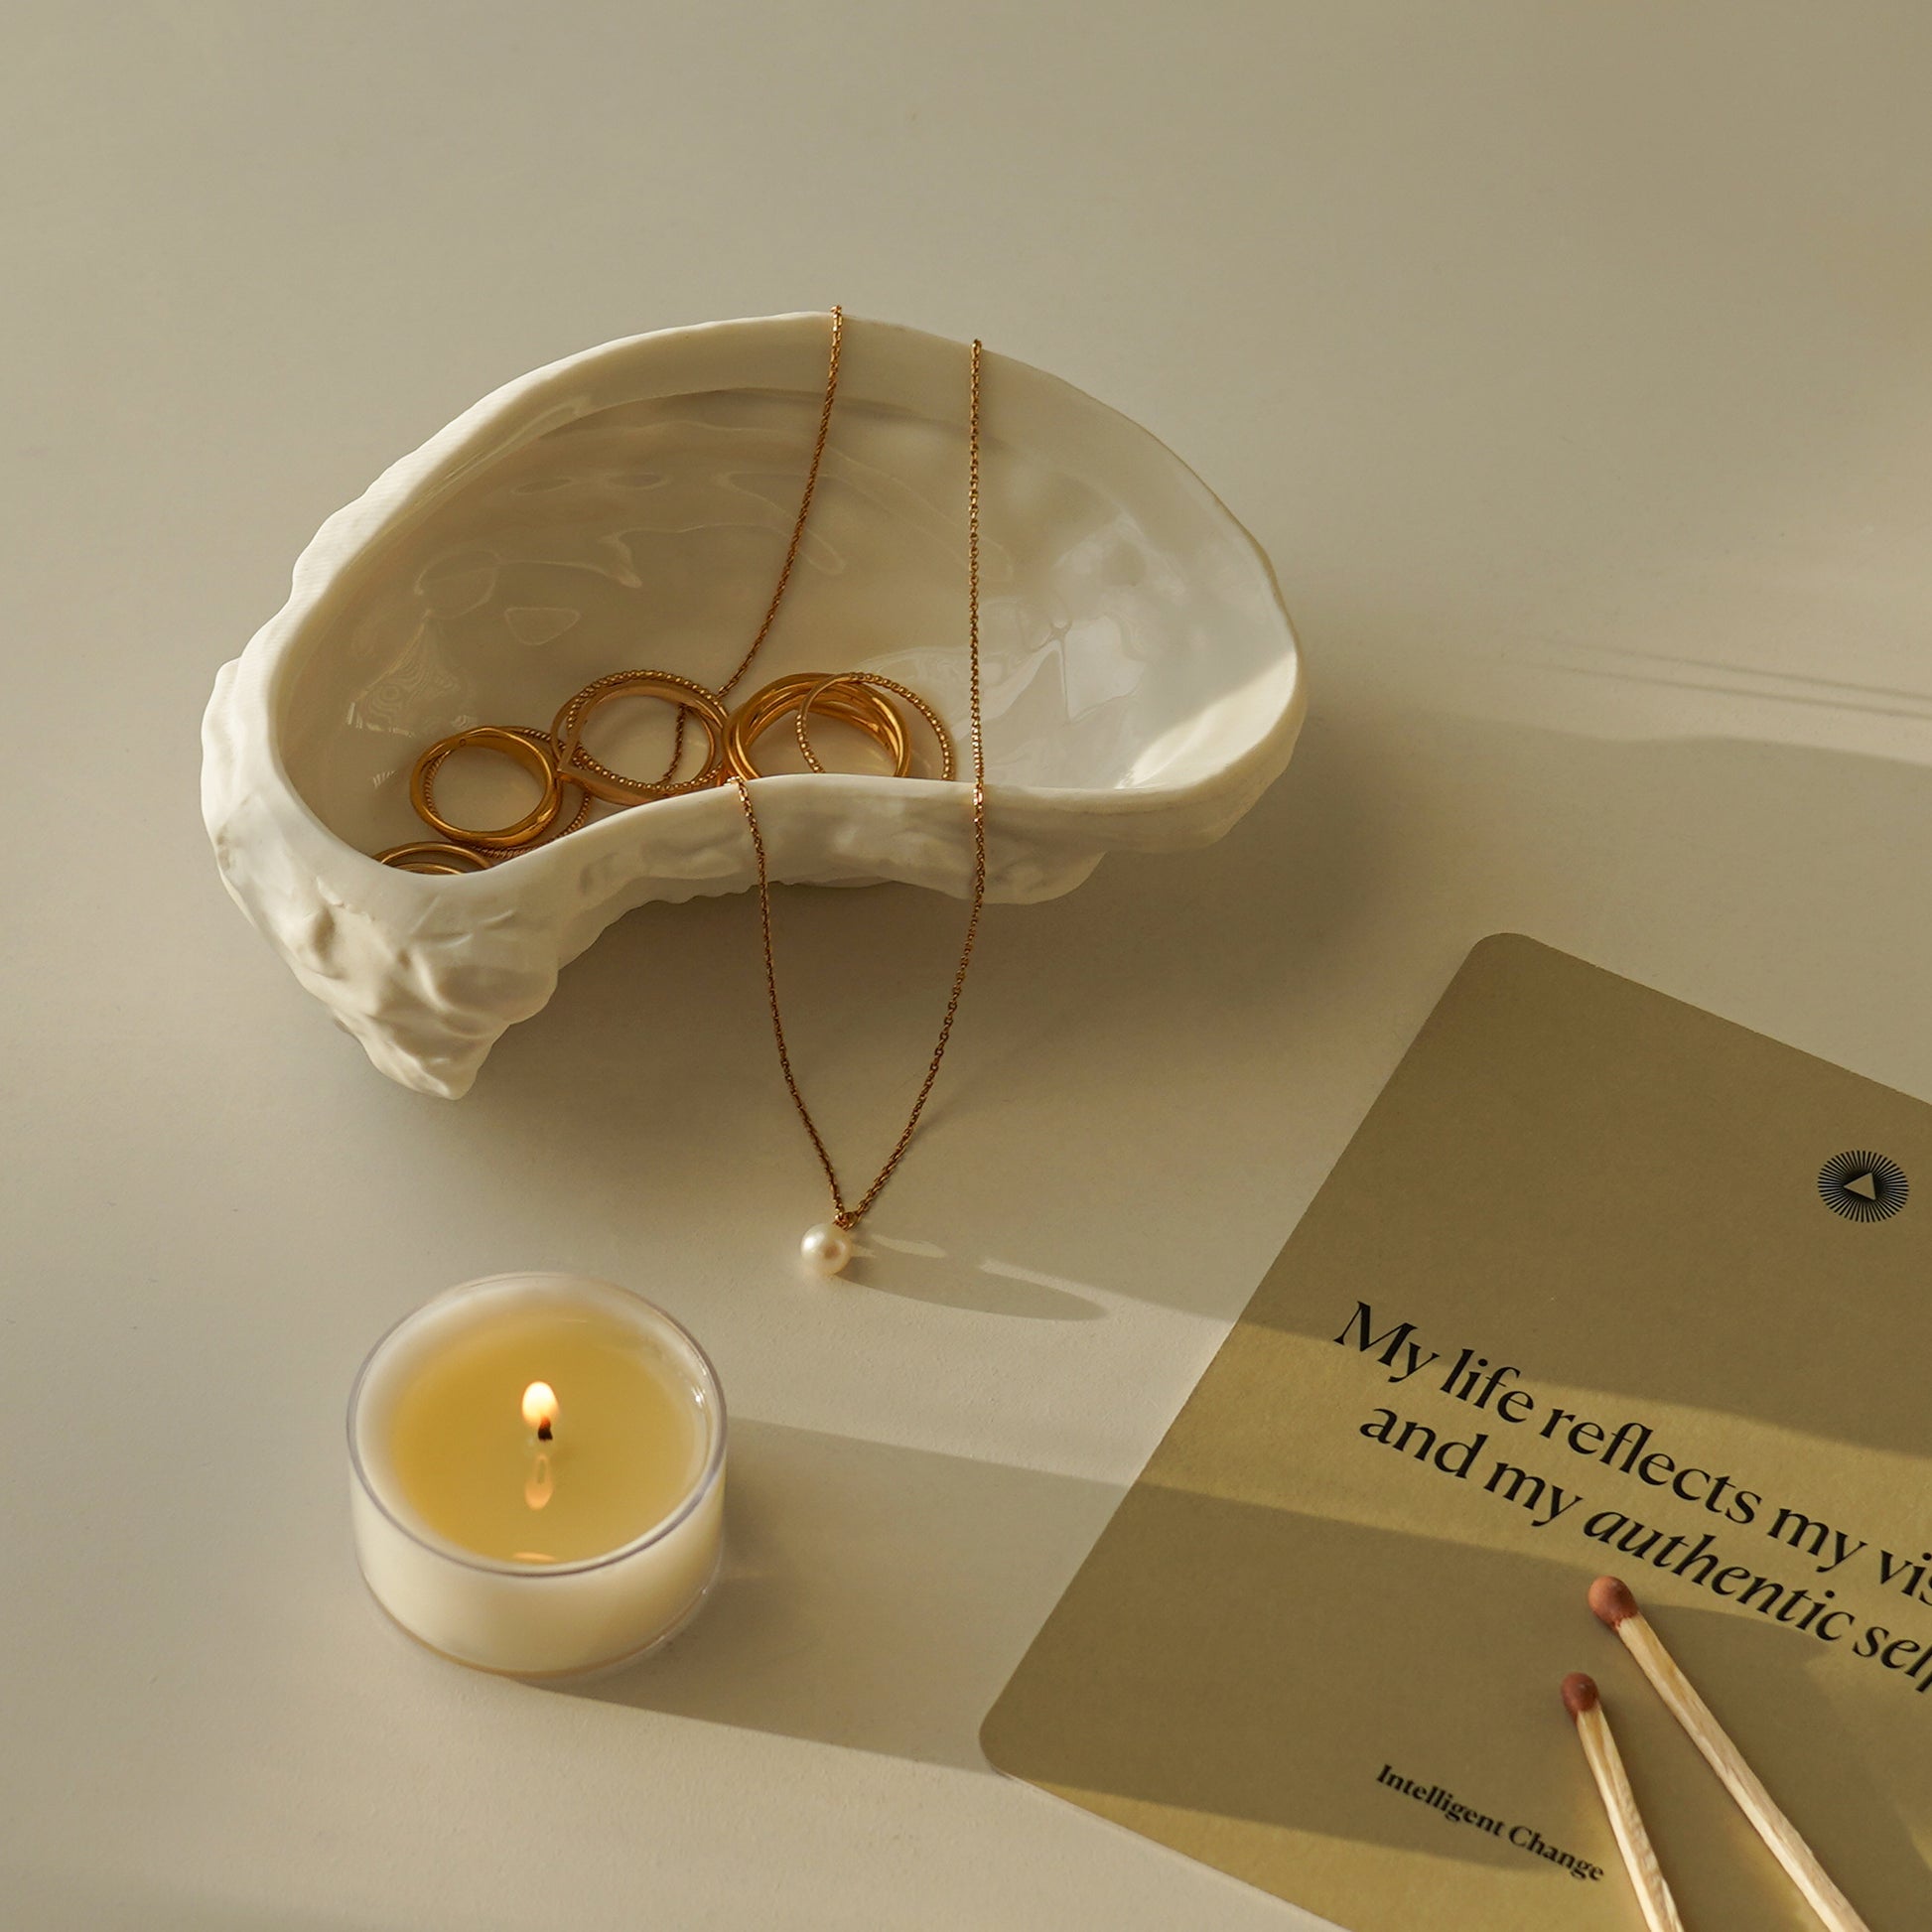 gold jewelry in an oyster dish, a lit tealight candle, and affirmation card from Intelligent Change on the white table